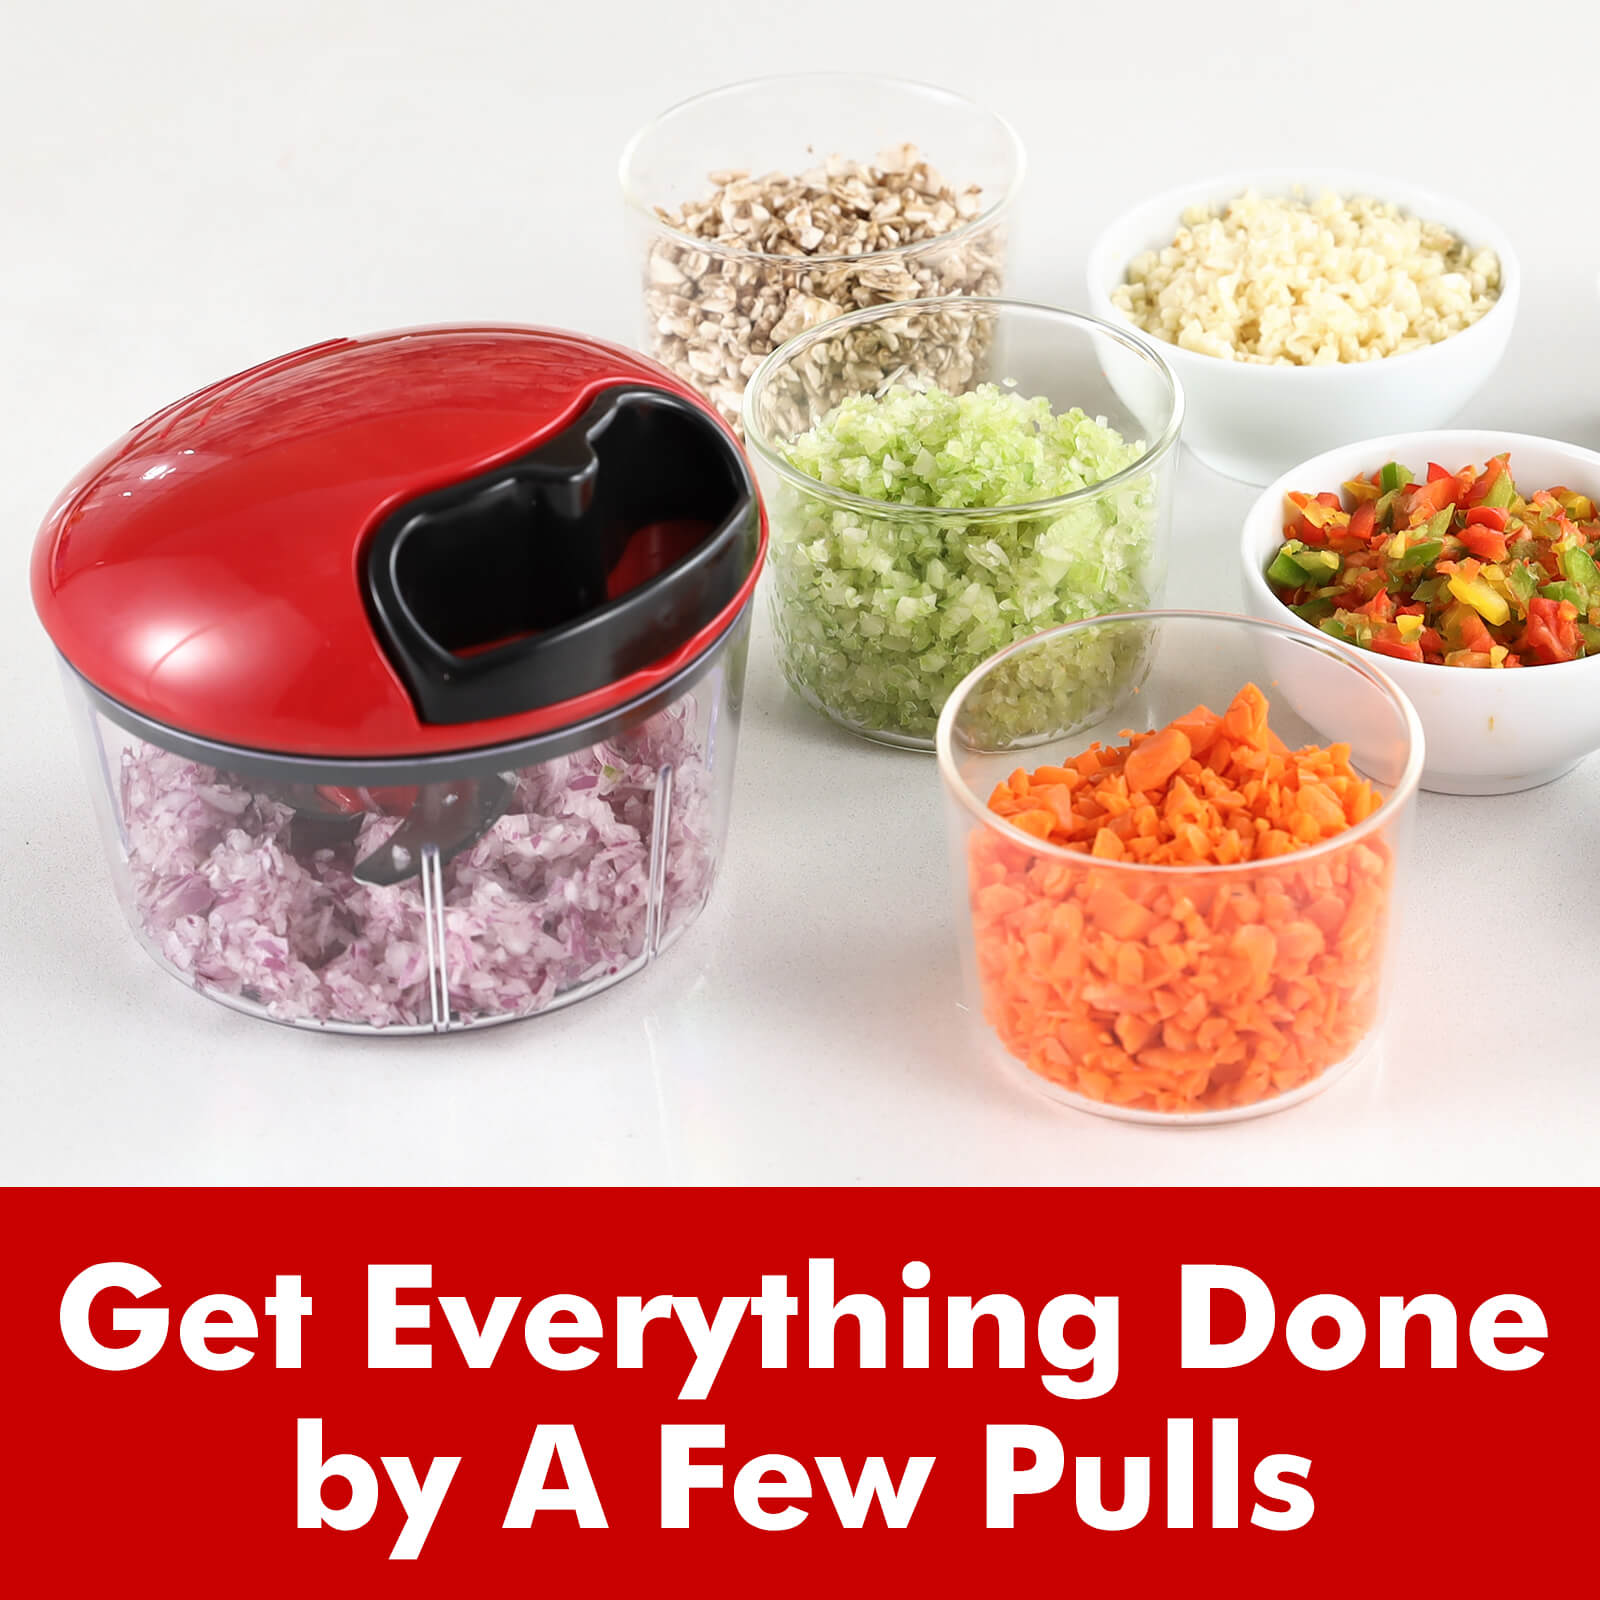 Geedel Pull String Food Chopper,Vegetable Chopper, 2.5 Cup Onion Dicer White